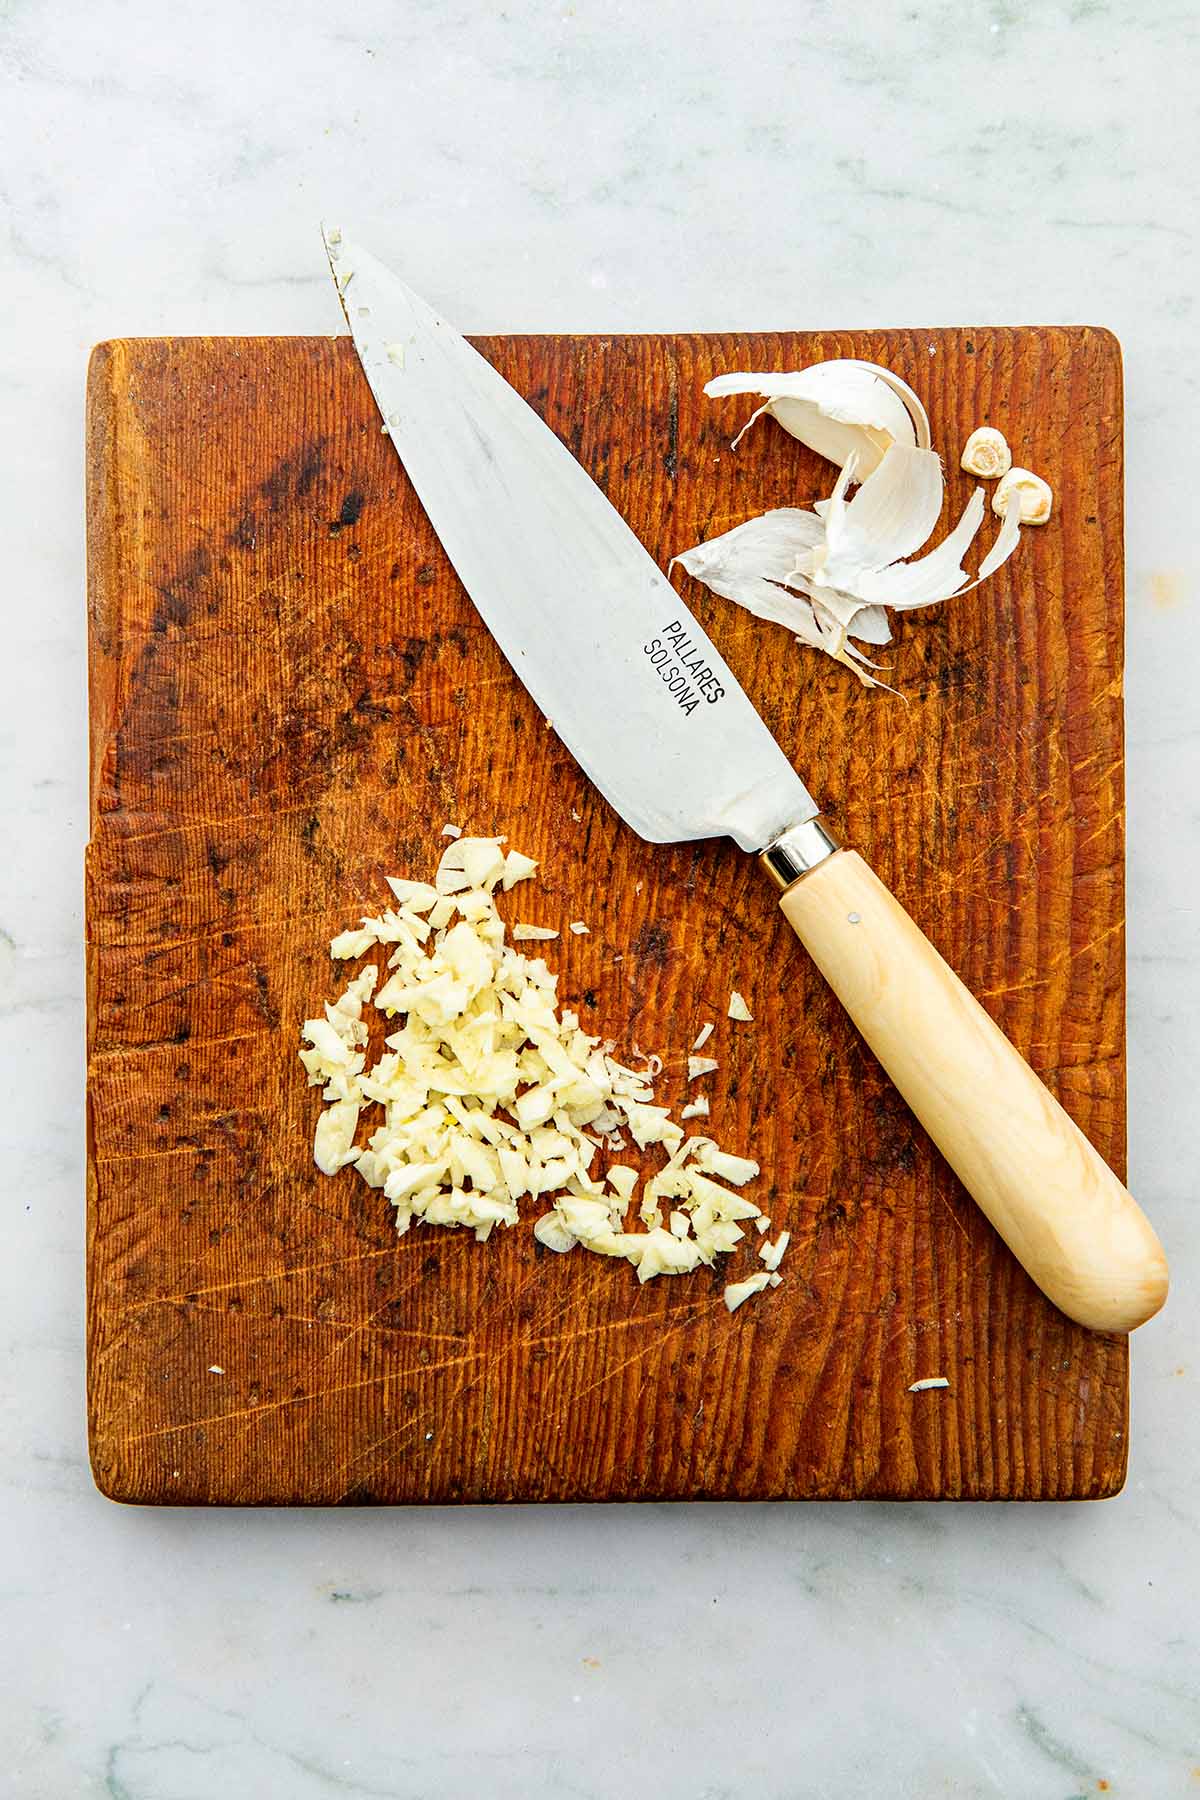 A small wood cutting board with chopped garlic, garlic skins, and a knife on top.